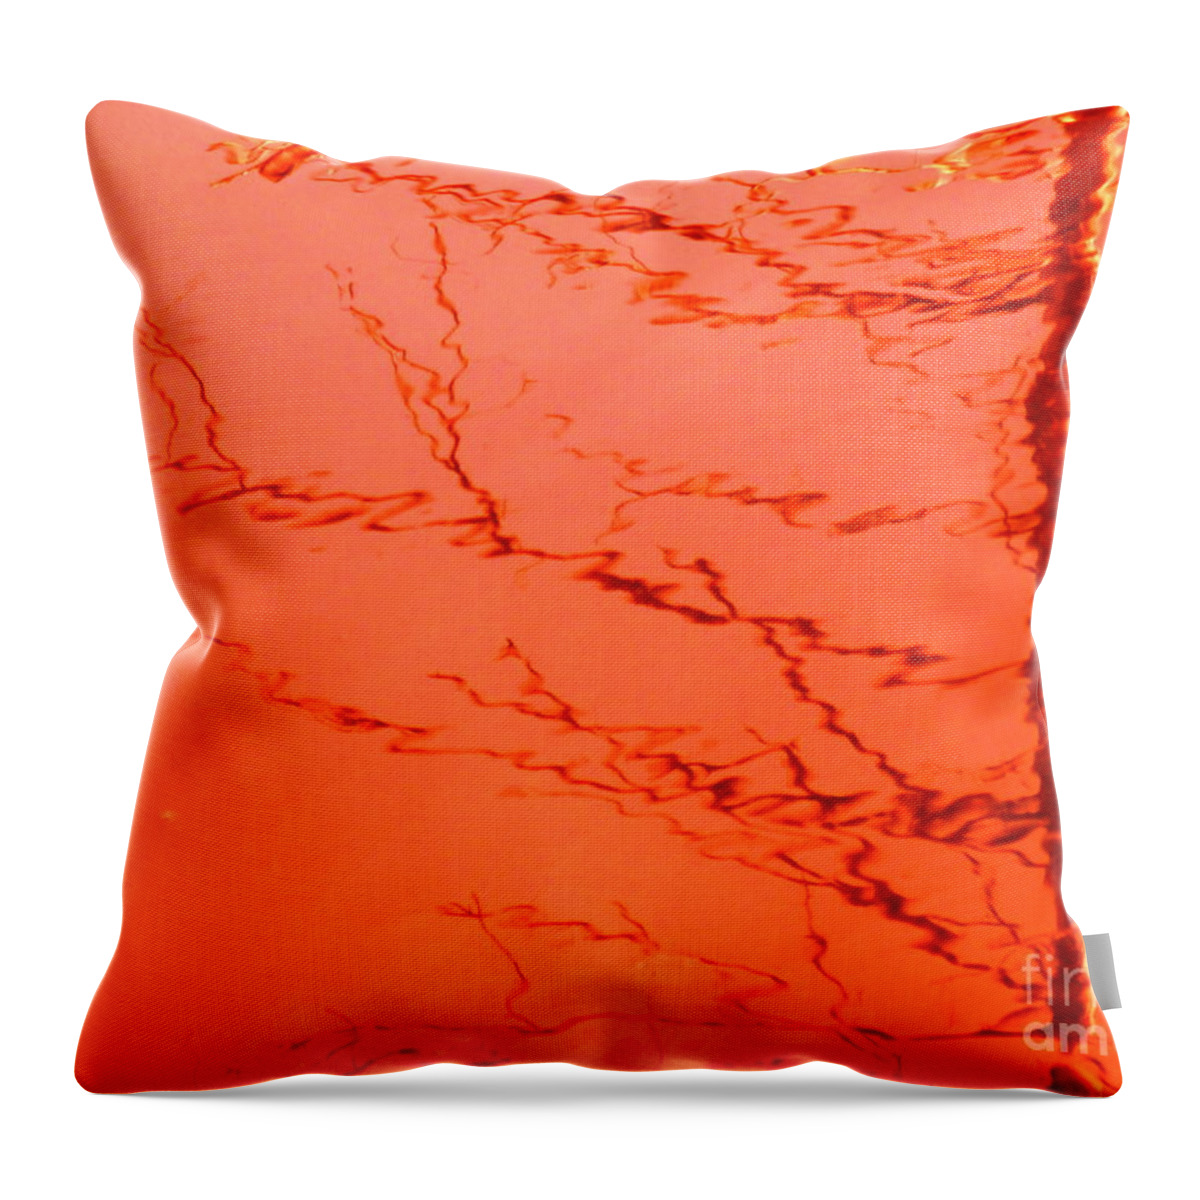 Water Throw Pillow featuring the photograph Abstract Orange by Sybil Staples